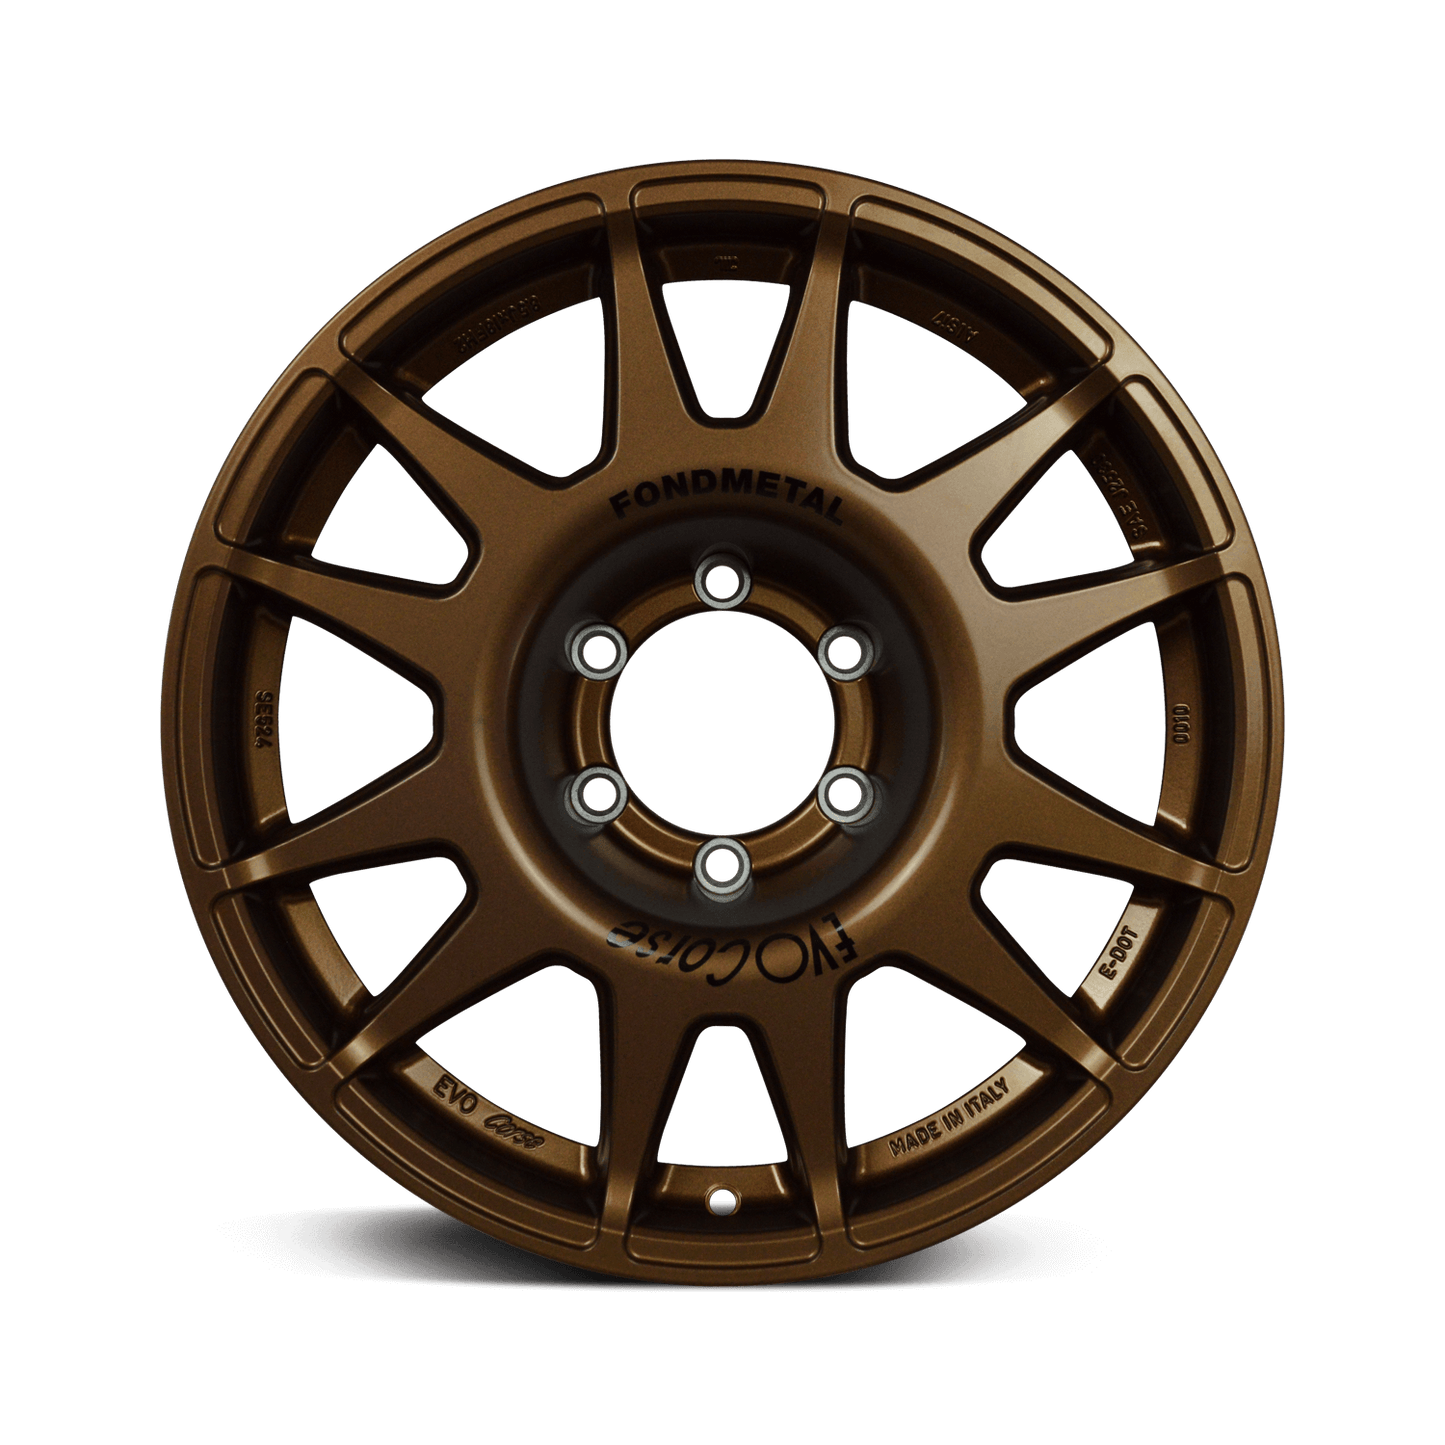 Evo Corse wheel front view mat bronze, for toyota land cruiser 300 series. the 4x4 off road allow wheel with the highest high load rating for overlanding, rally, 4wd expedition use in australia